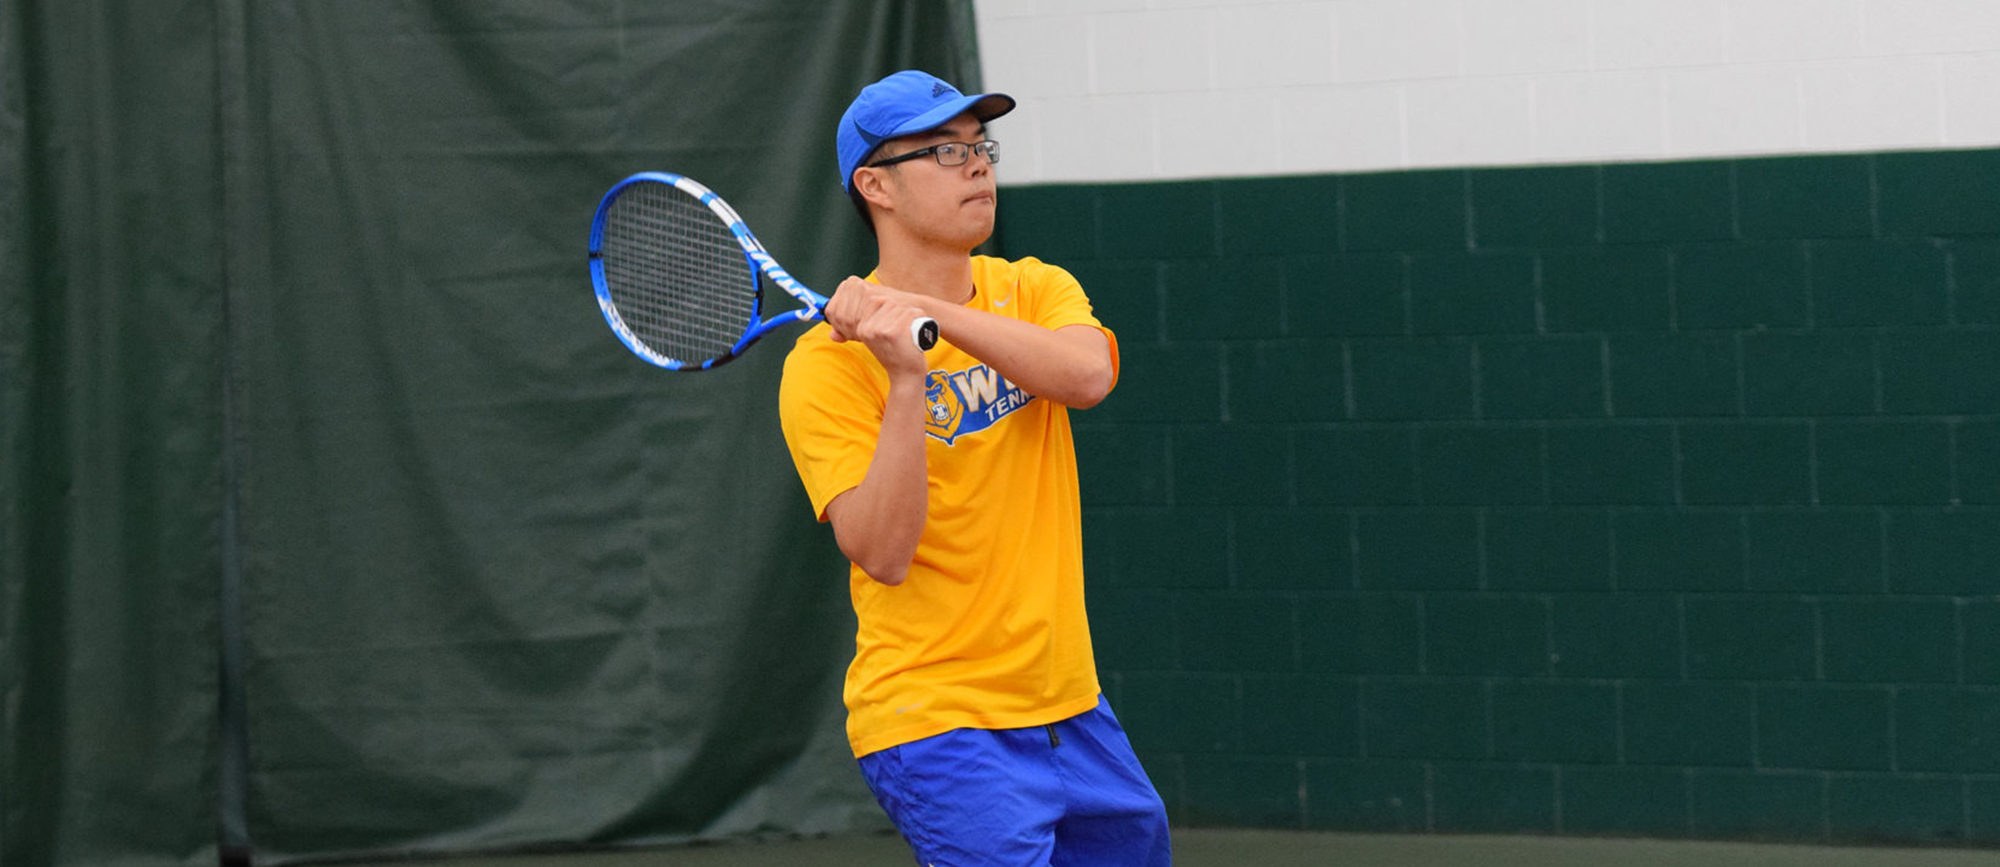 Junior Michael Tran won at No. 5 singles in Western New England's 8-1 win over Brooklyn College in Orlando on Friday. (Photo by Rachael Margossian)